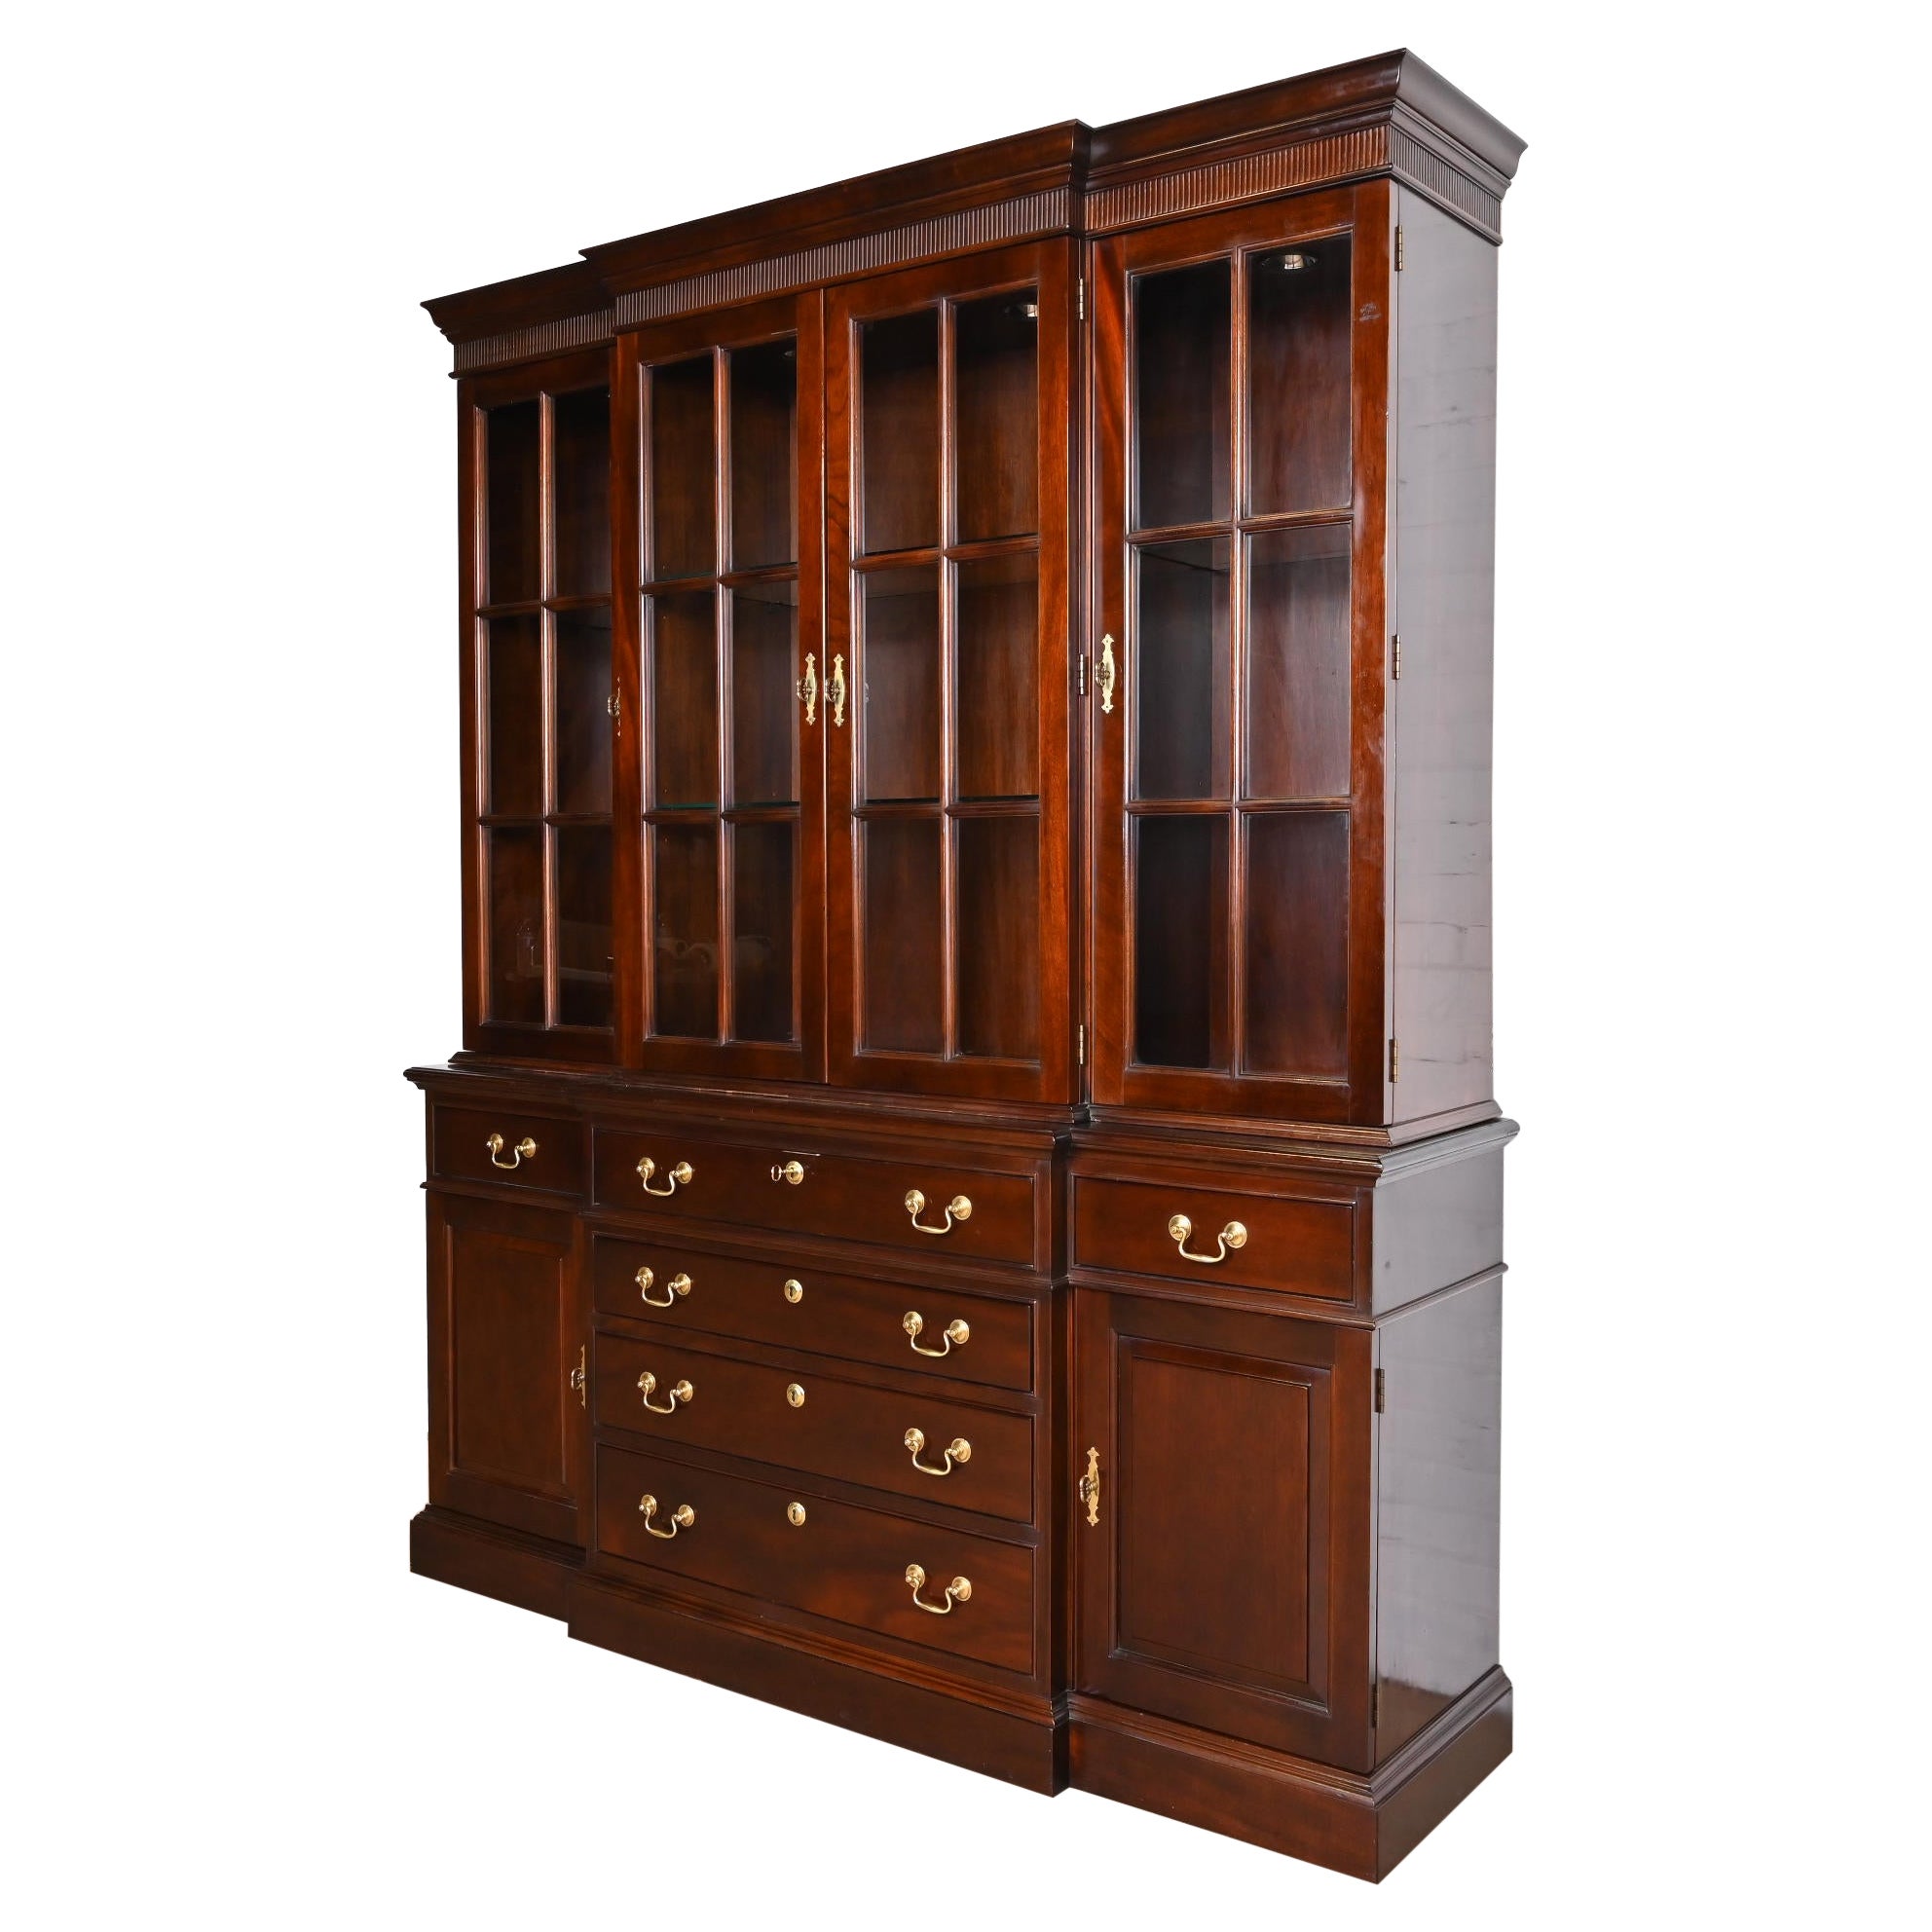 Stickley Georgian Cherry Wood Lighted Breakfront Bookcase Cabinet